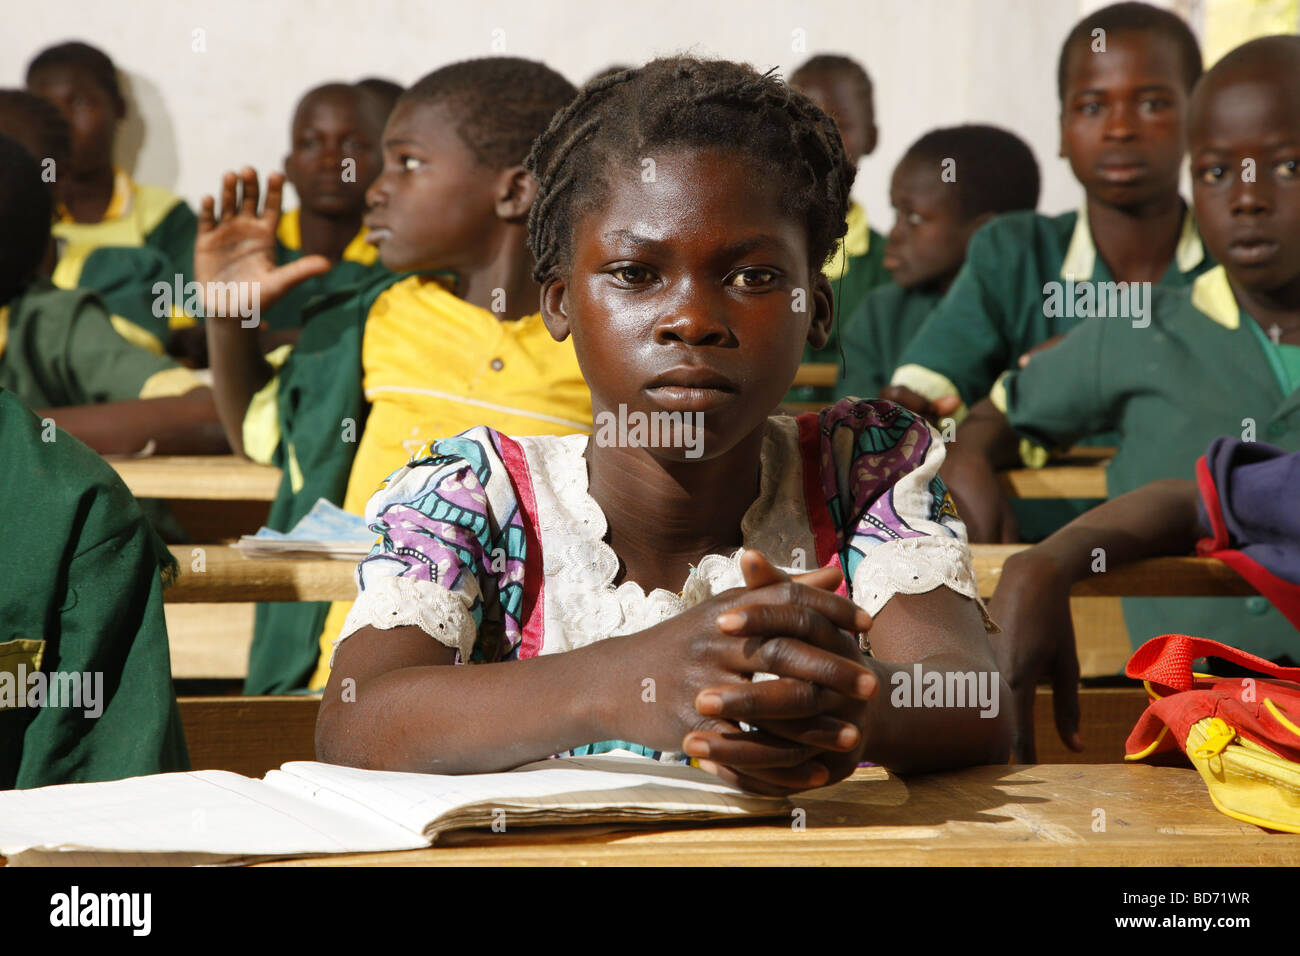 Girl without uniforms with classmates in uniform, during lessons, Mora, Cameroon, Africa Stock Photo